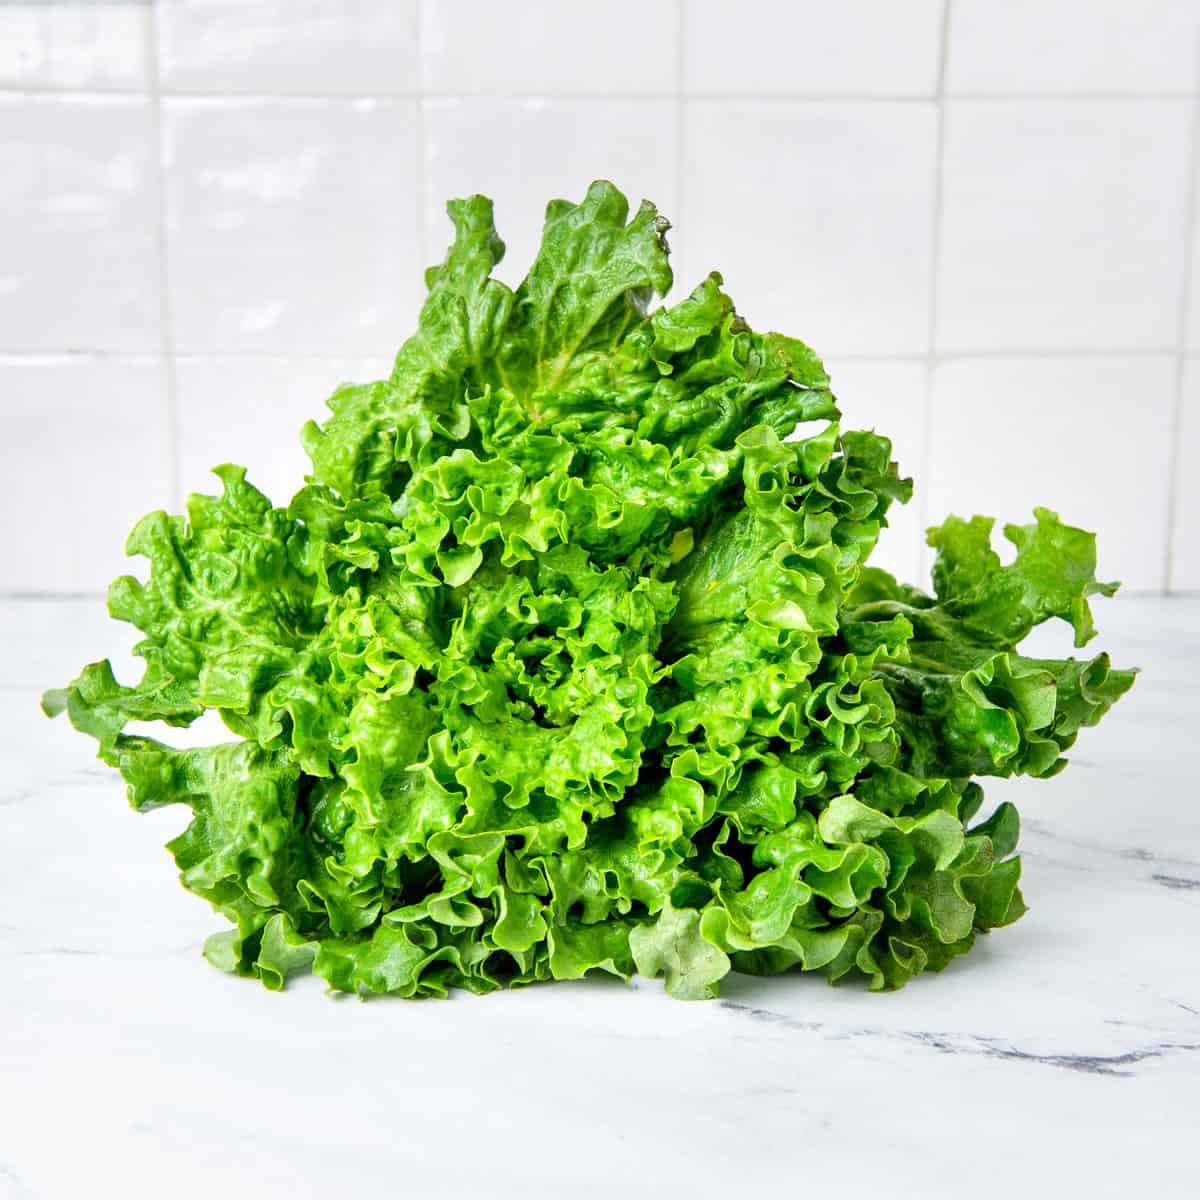 A head of lettuce on a kitchen counter.